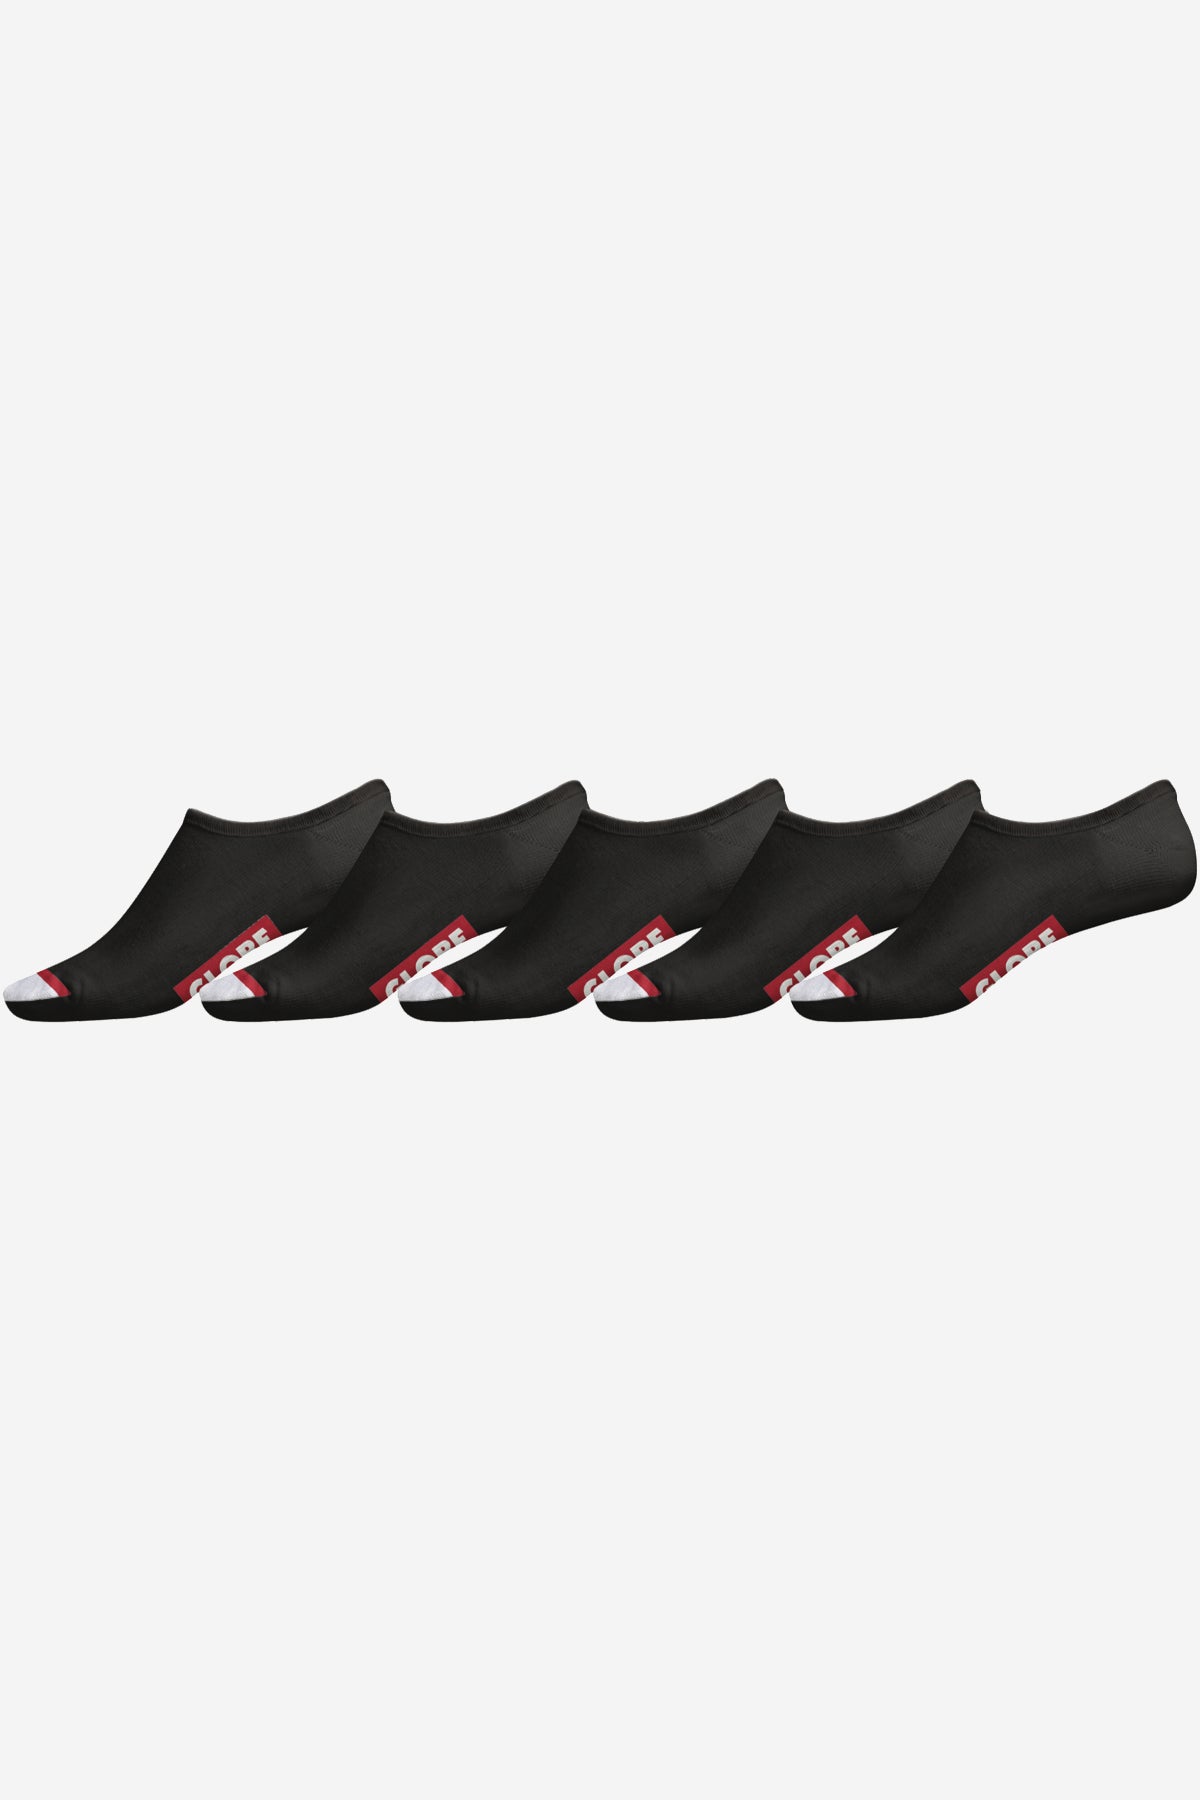 w tipper invisible sock 5 pack black